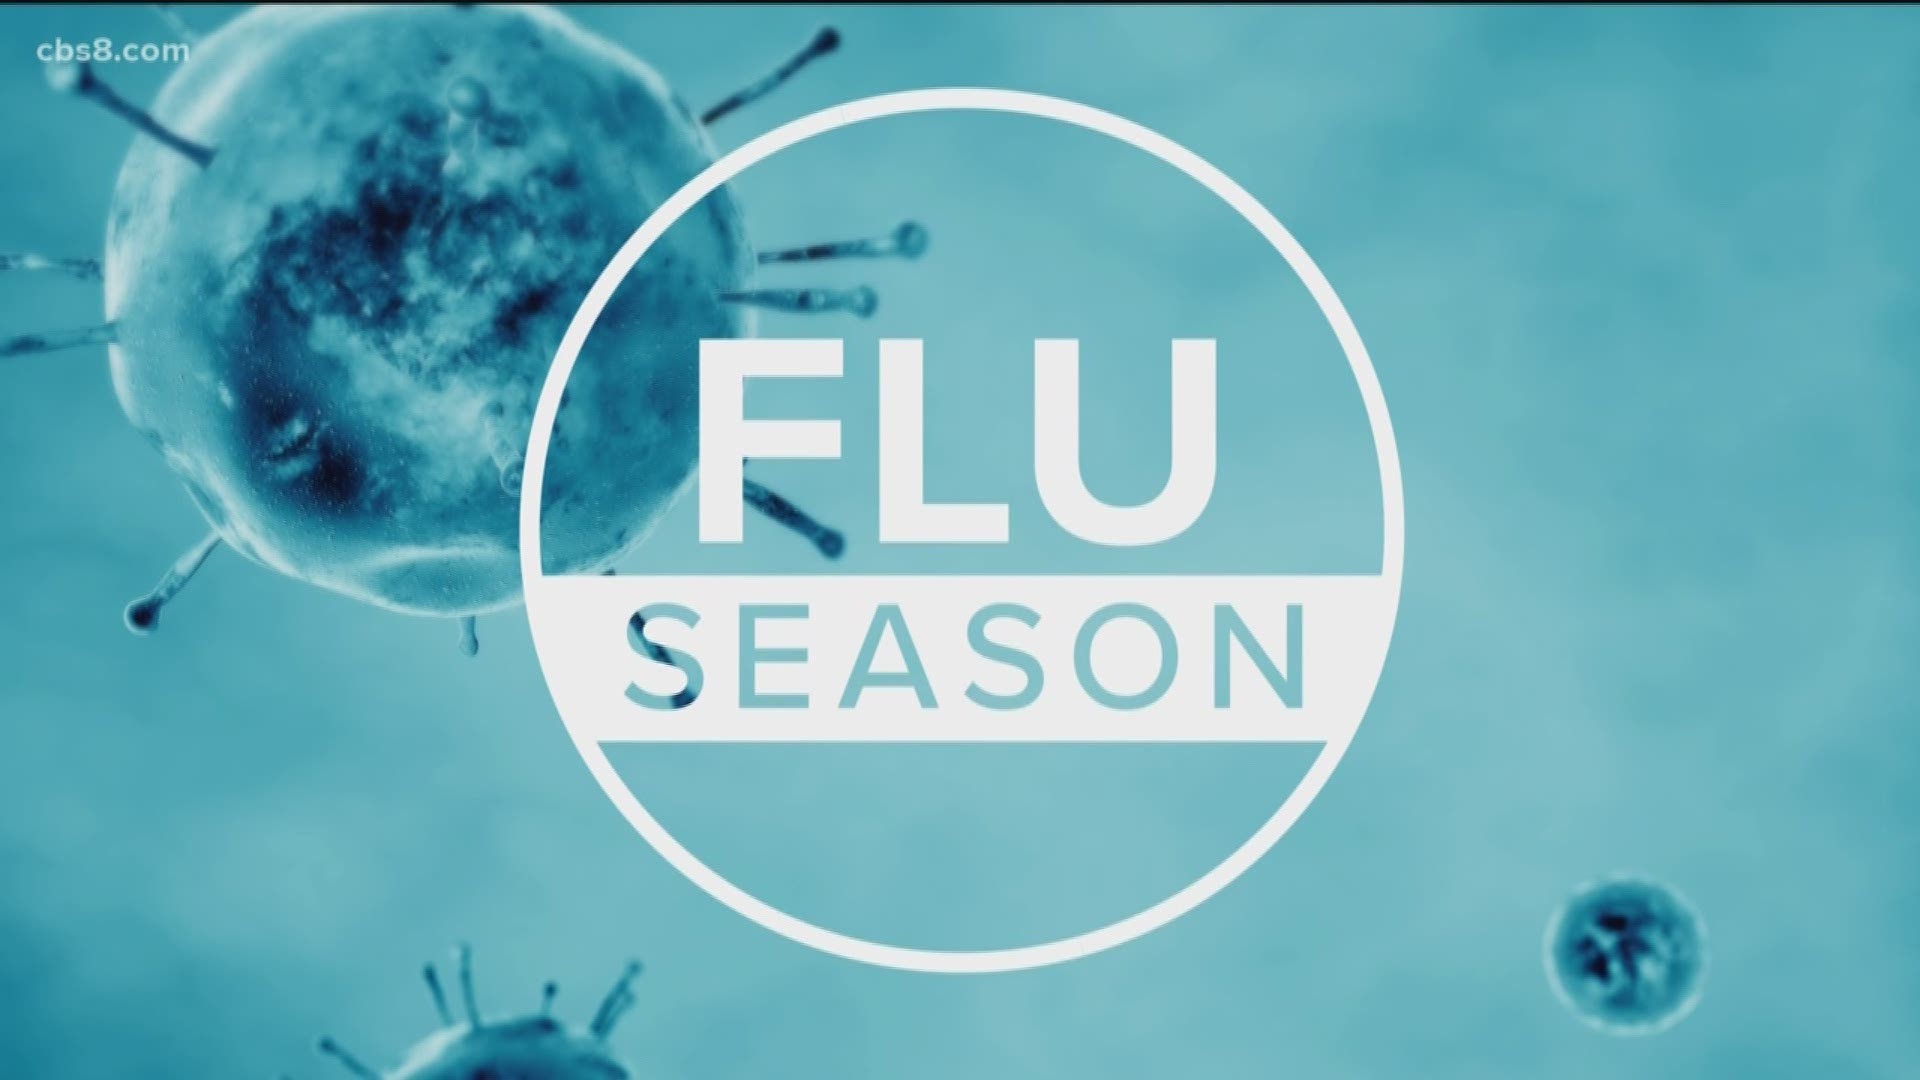 San Diego health officials have been urging everyone to get vaccinated for the flu. News 8's Amanda Shotsky has some tips on how to stop the flu in its tracks.